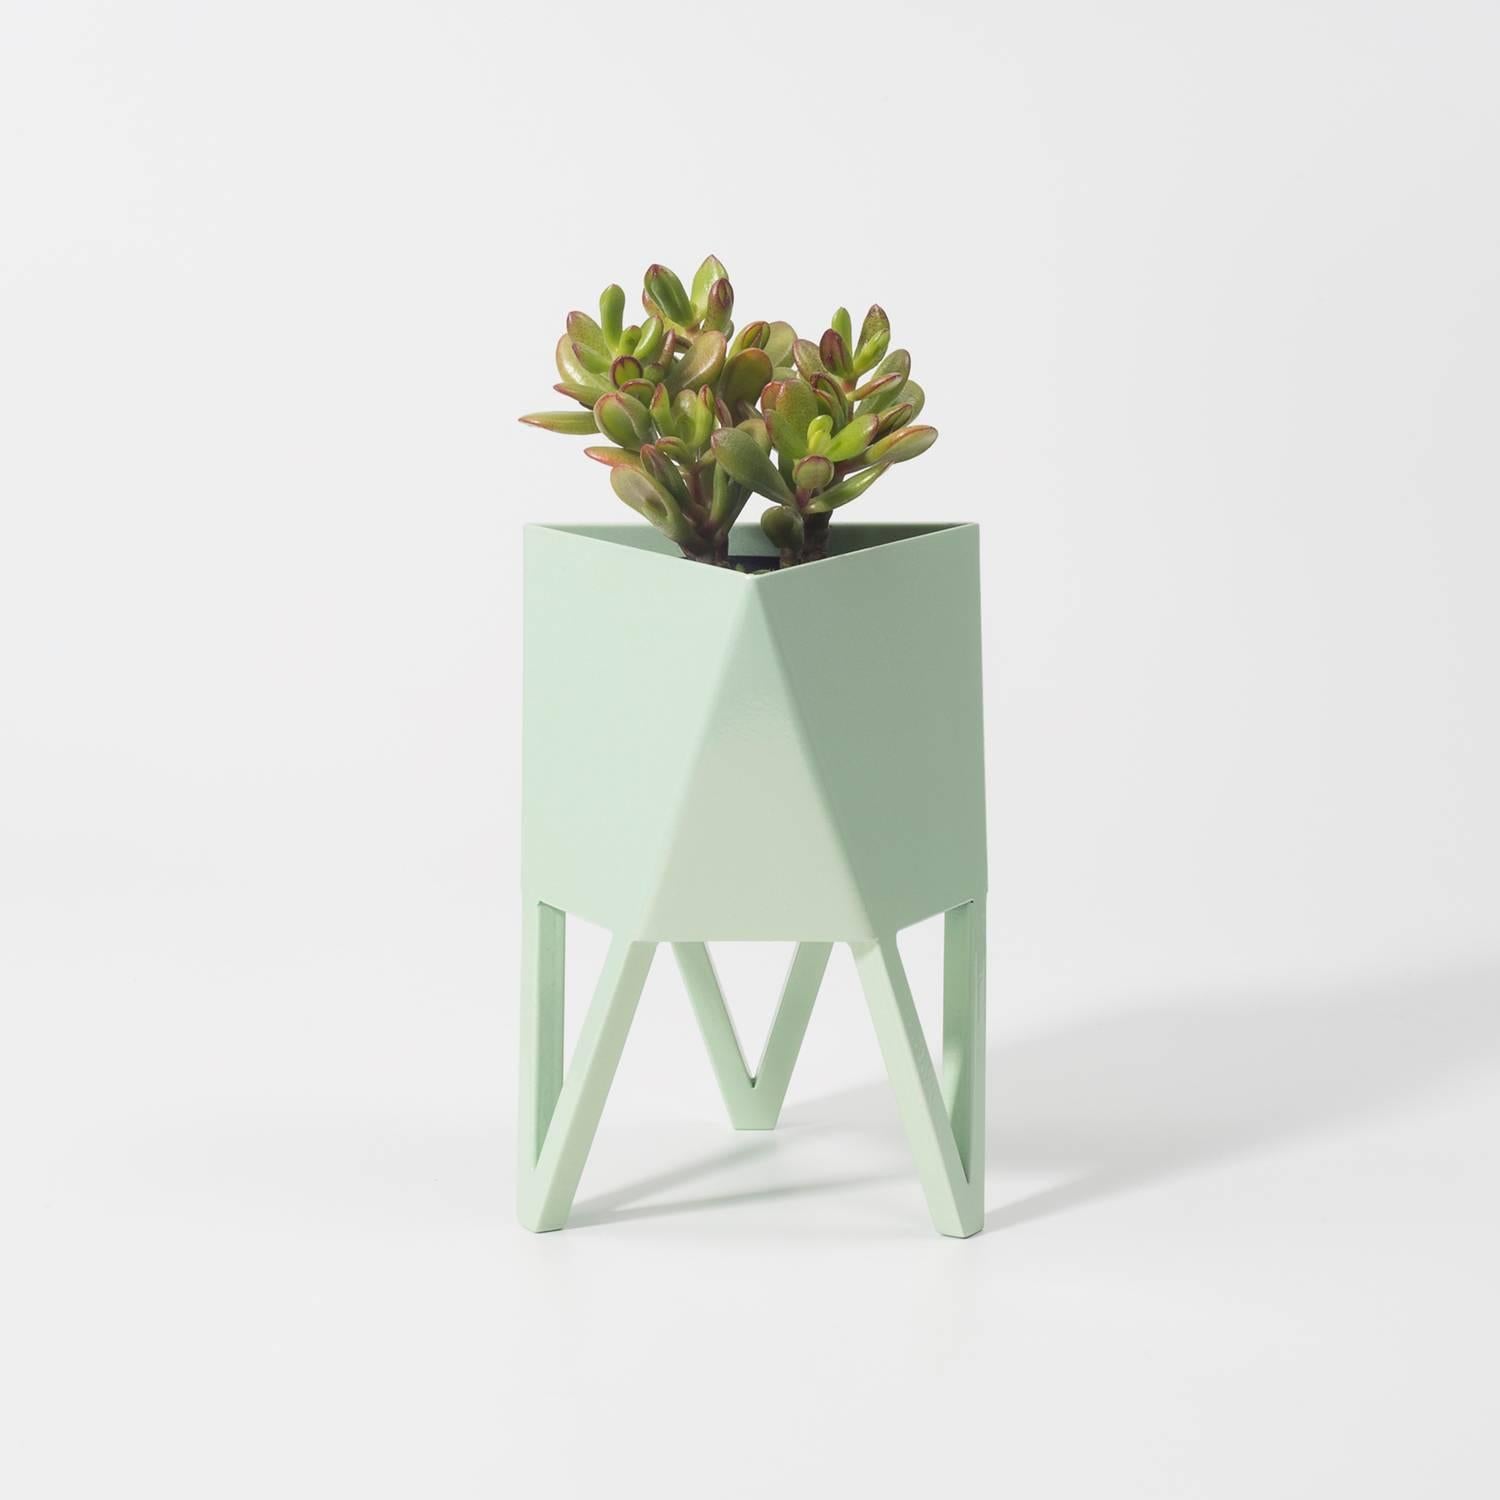 Deca Planter in Glossy White Steel, Small, by Force/Collide 1